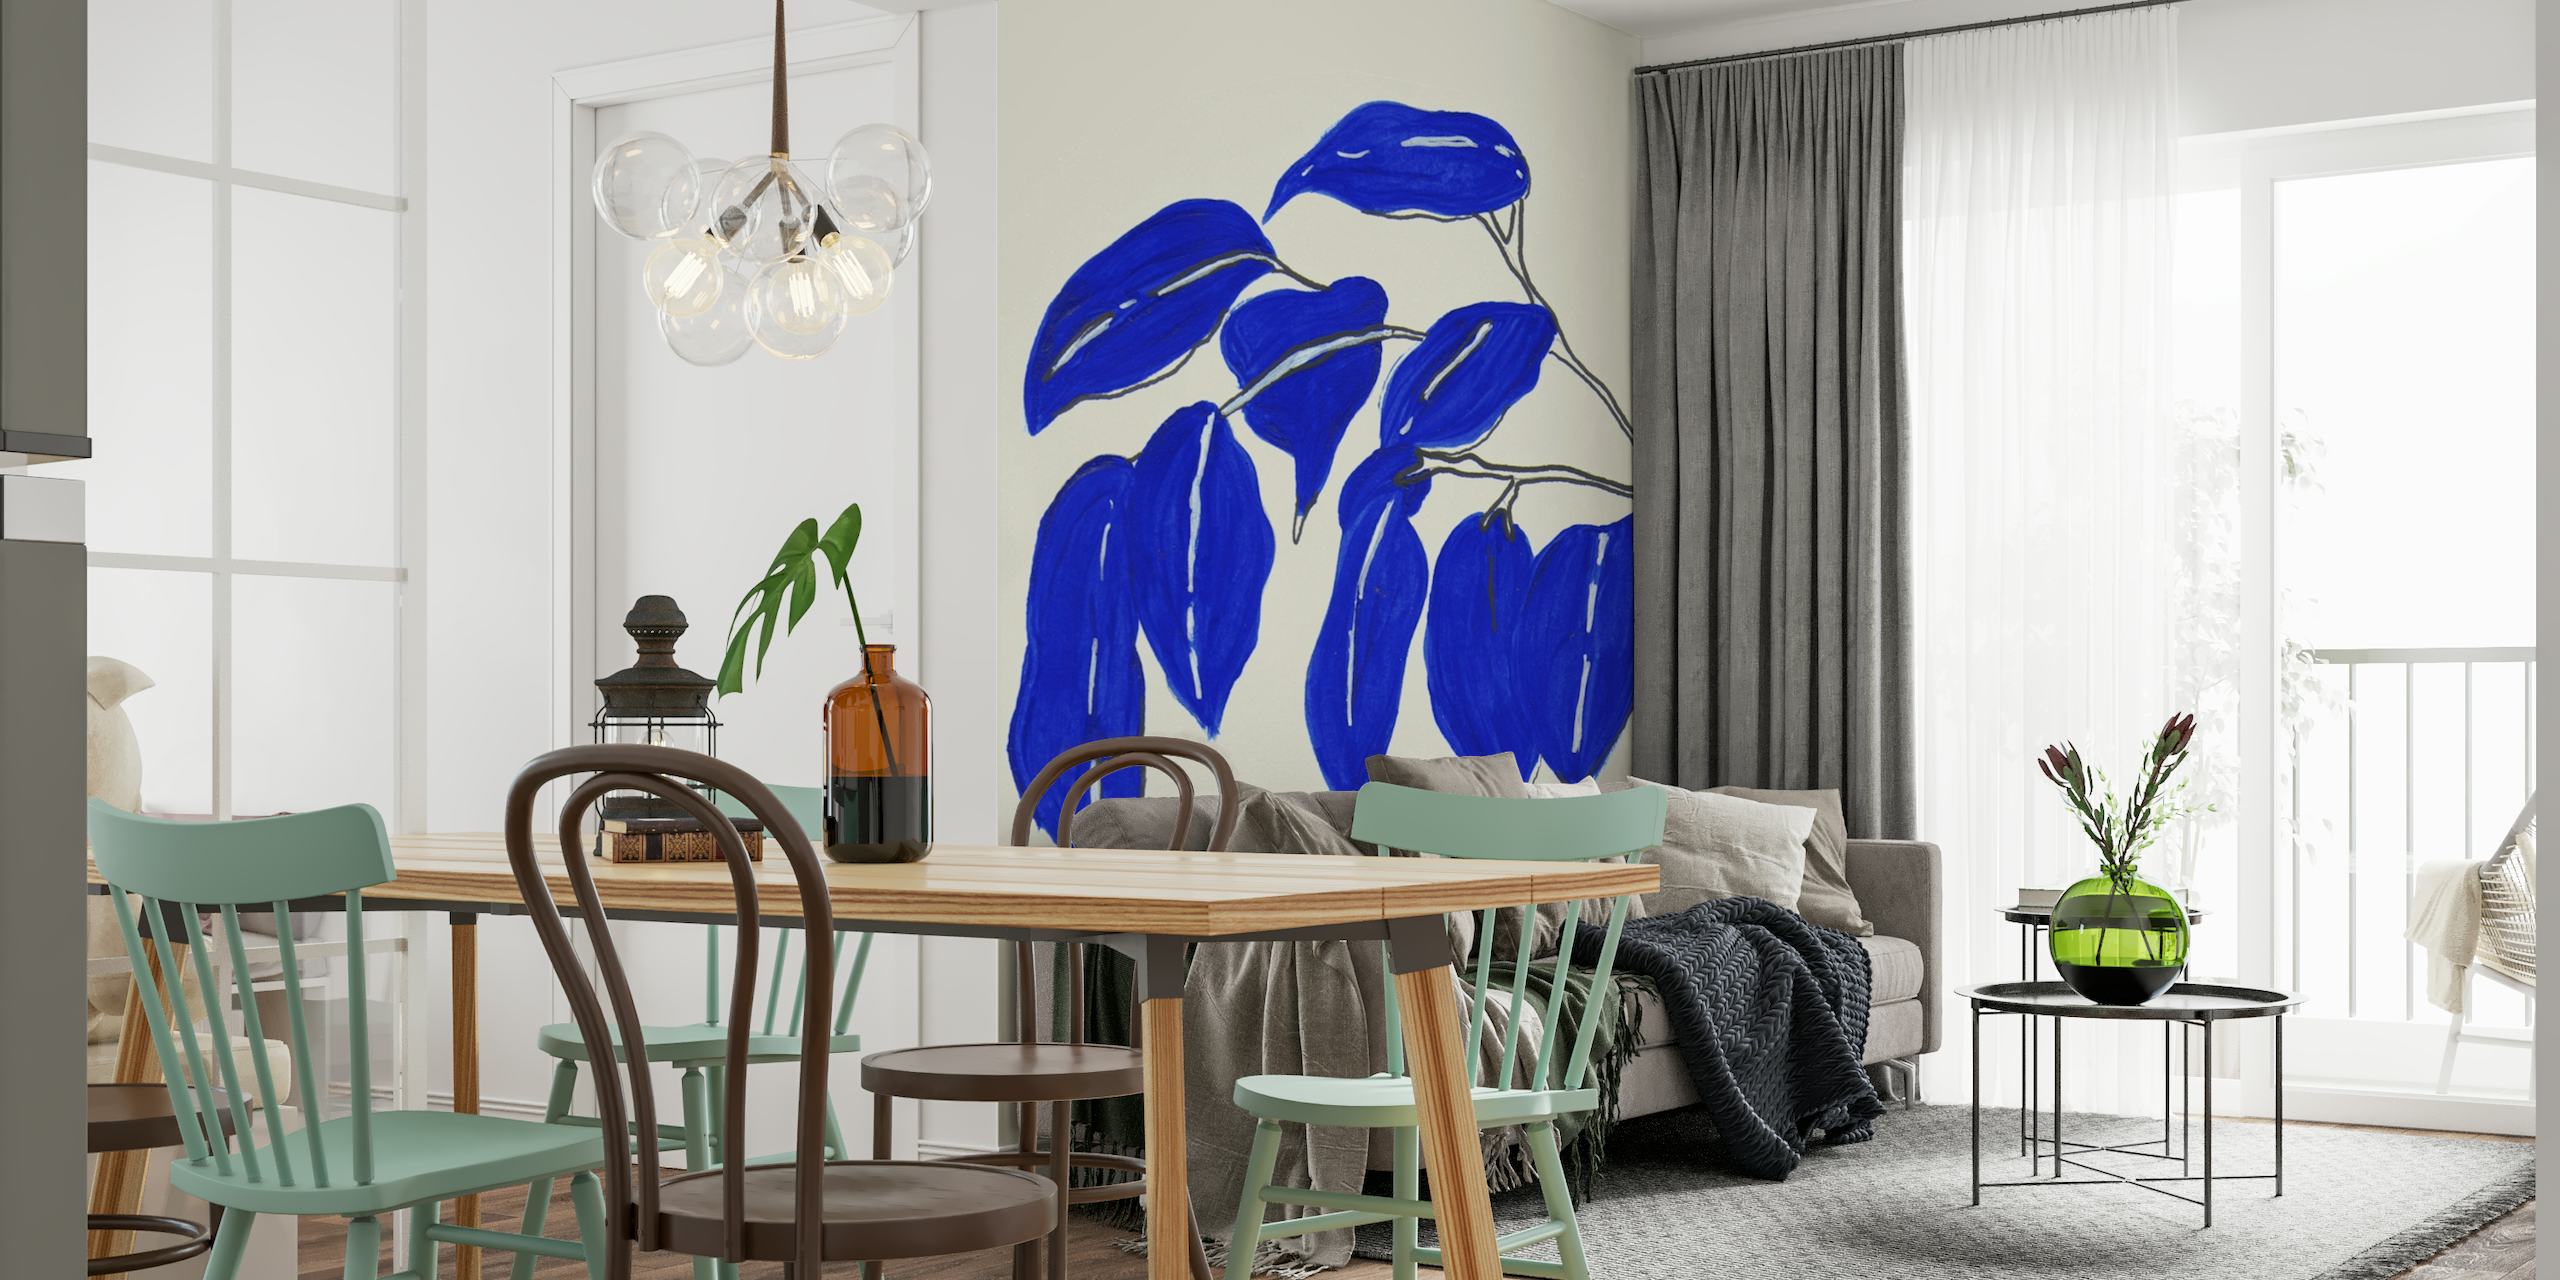 Abstract blue ficus leaves illustration on a wall mural